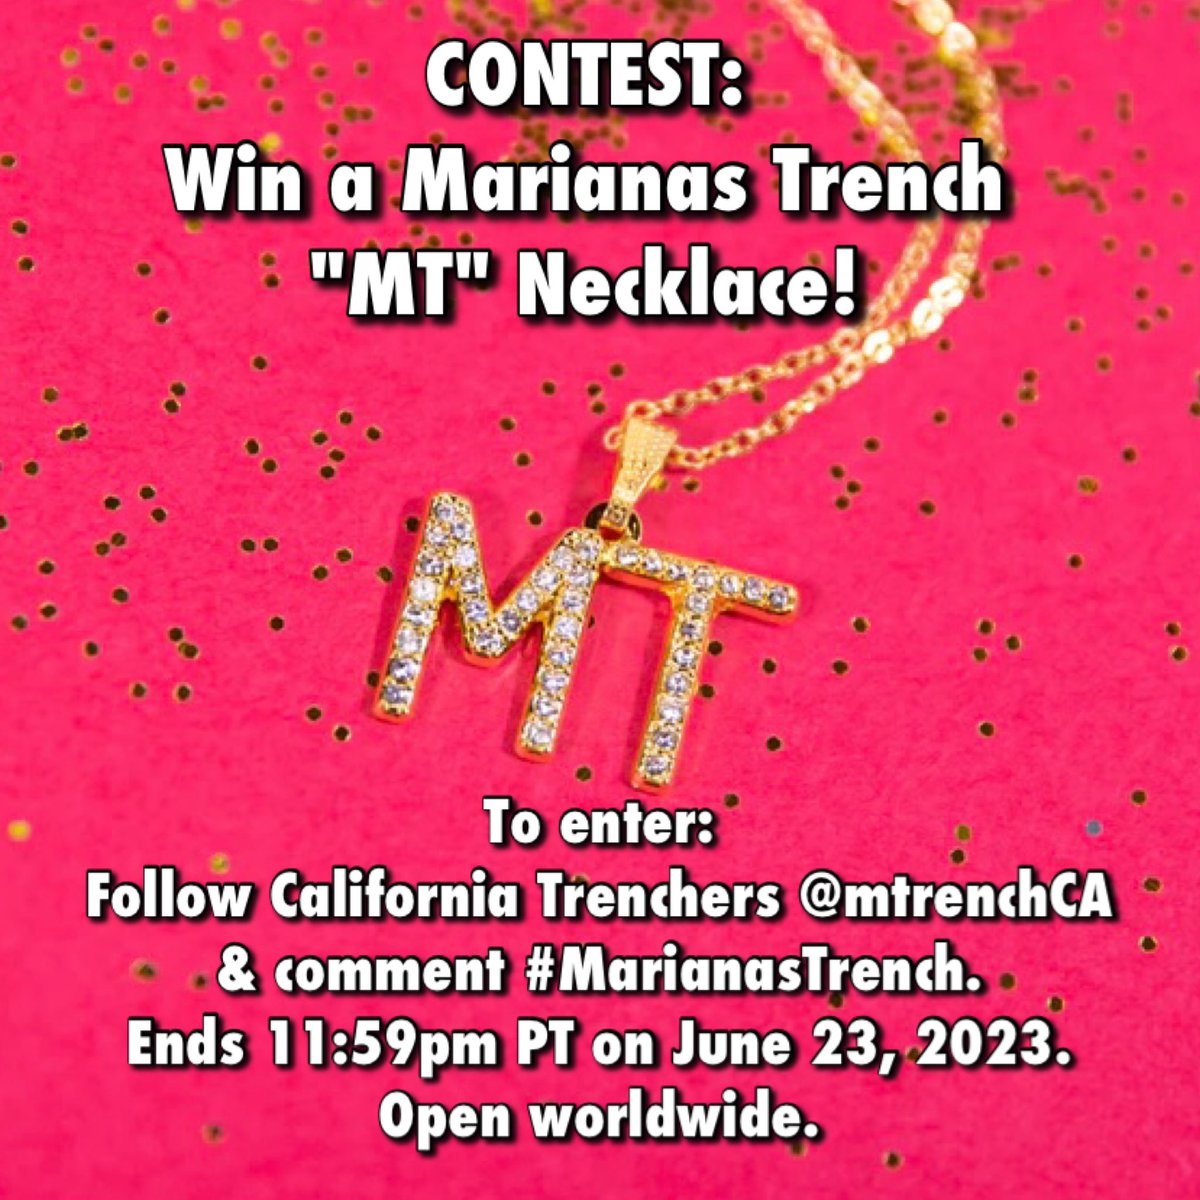 CONTEST: Win a Marianas Trench 'MT' necklace. To enter: Follow California Trenchers @mtrenchCA & comment #MarianasTrench. Ends 11:59pm PT on June 23, 2023. Open worldwide.